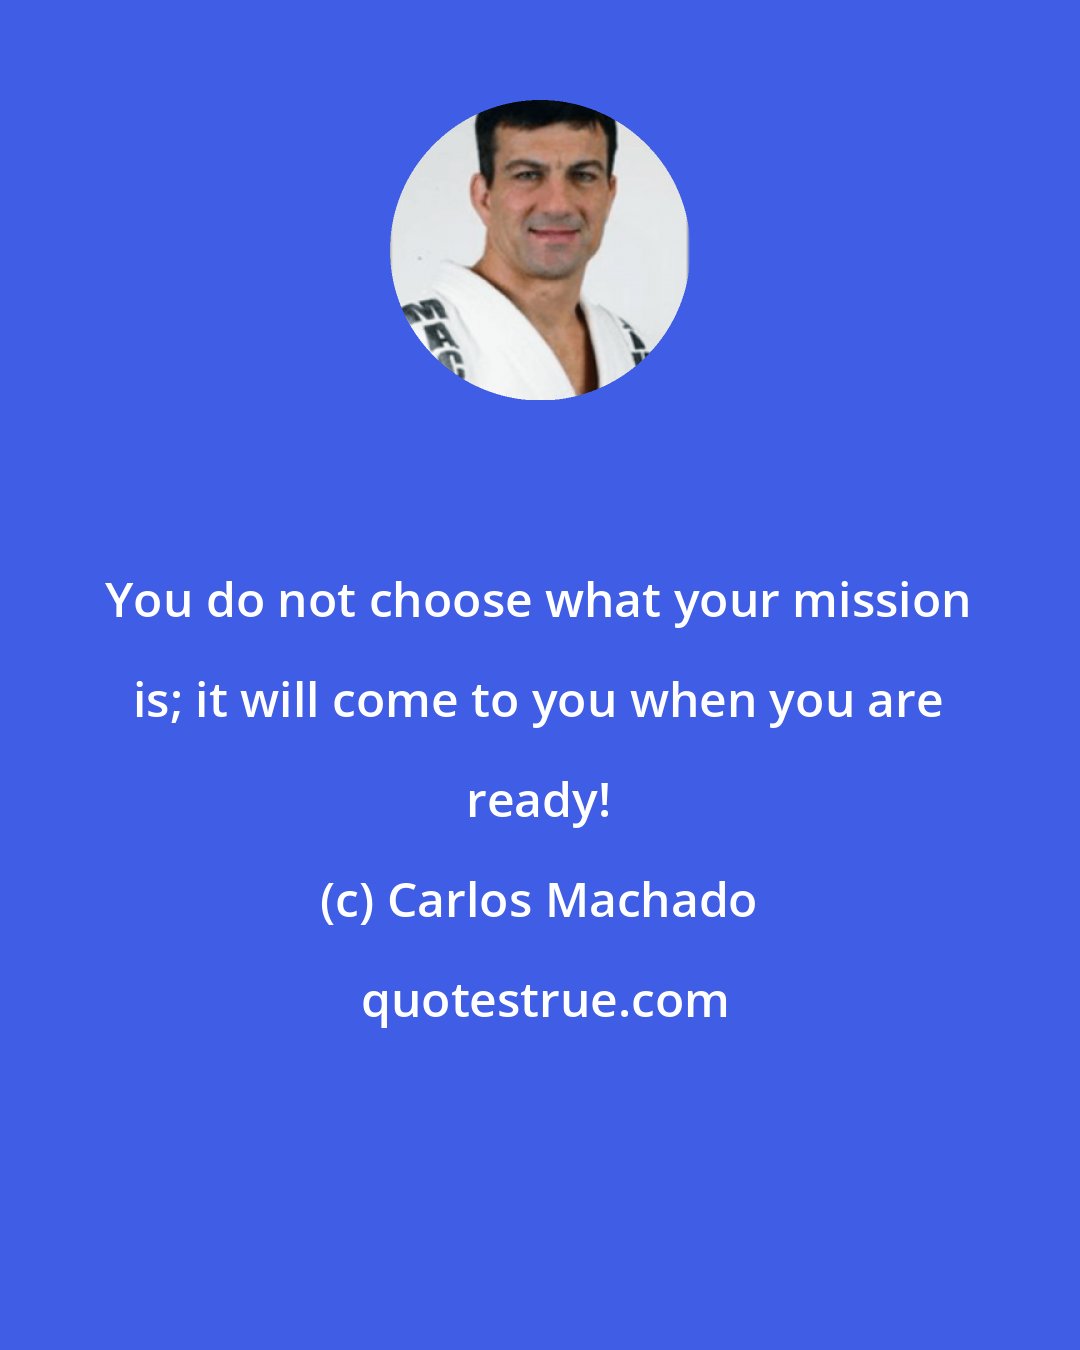 Carlos Machado: You do not choose what your mission is; it will come to you when you are ready!